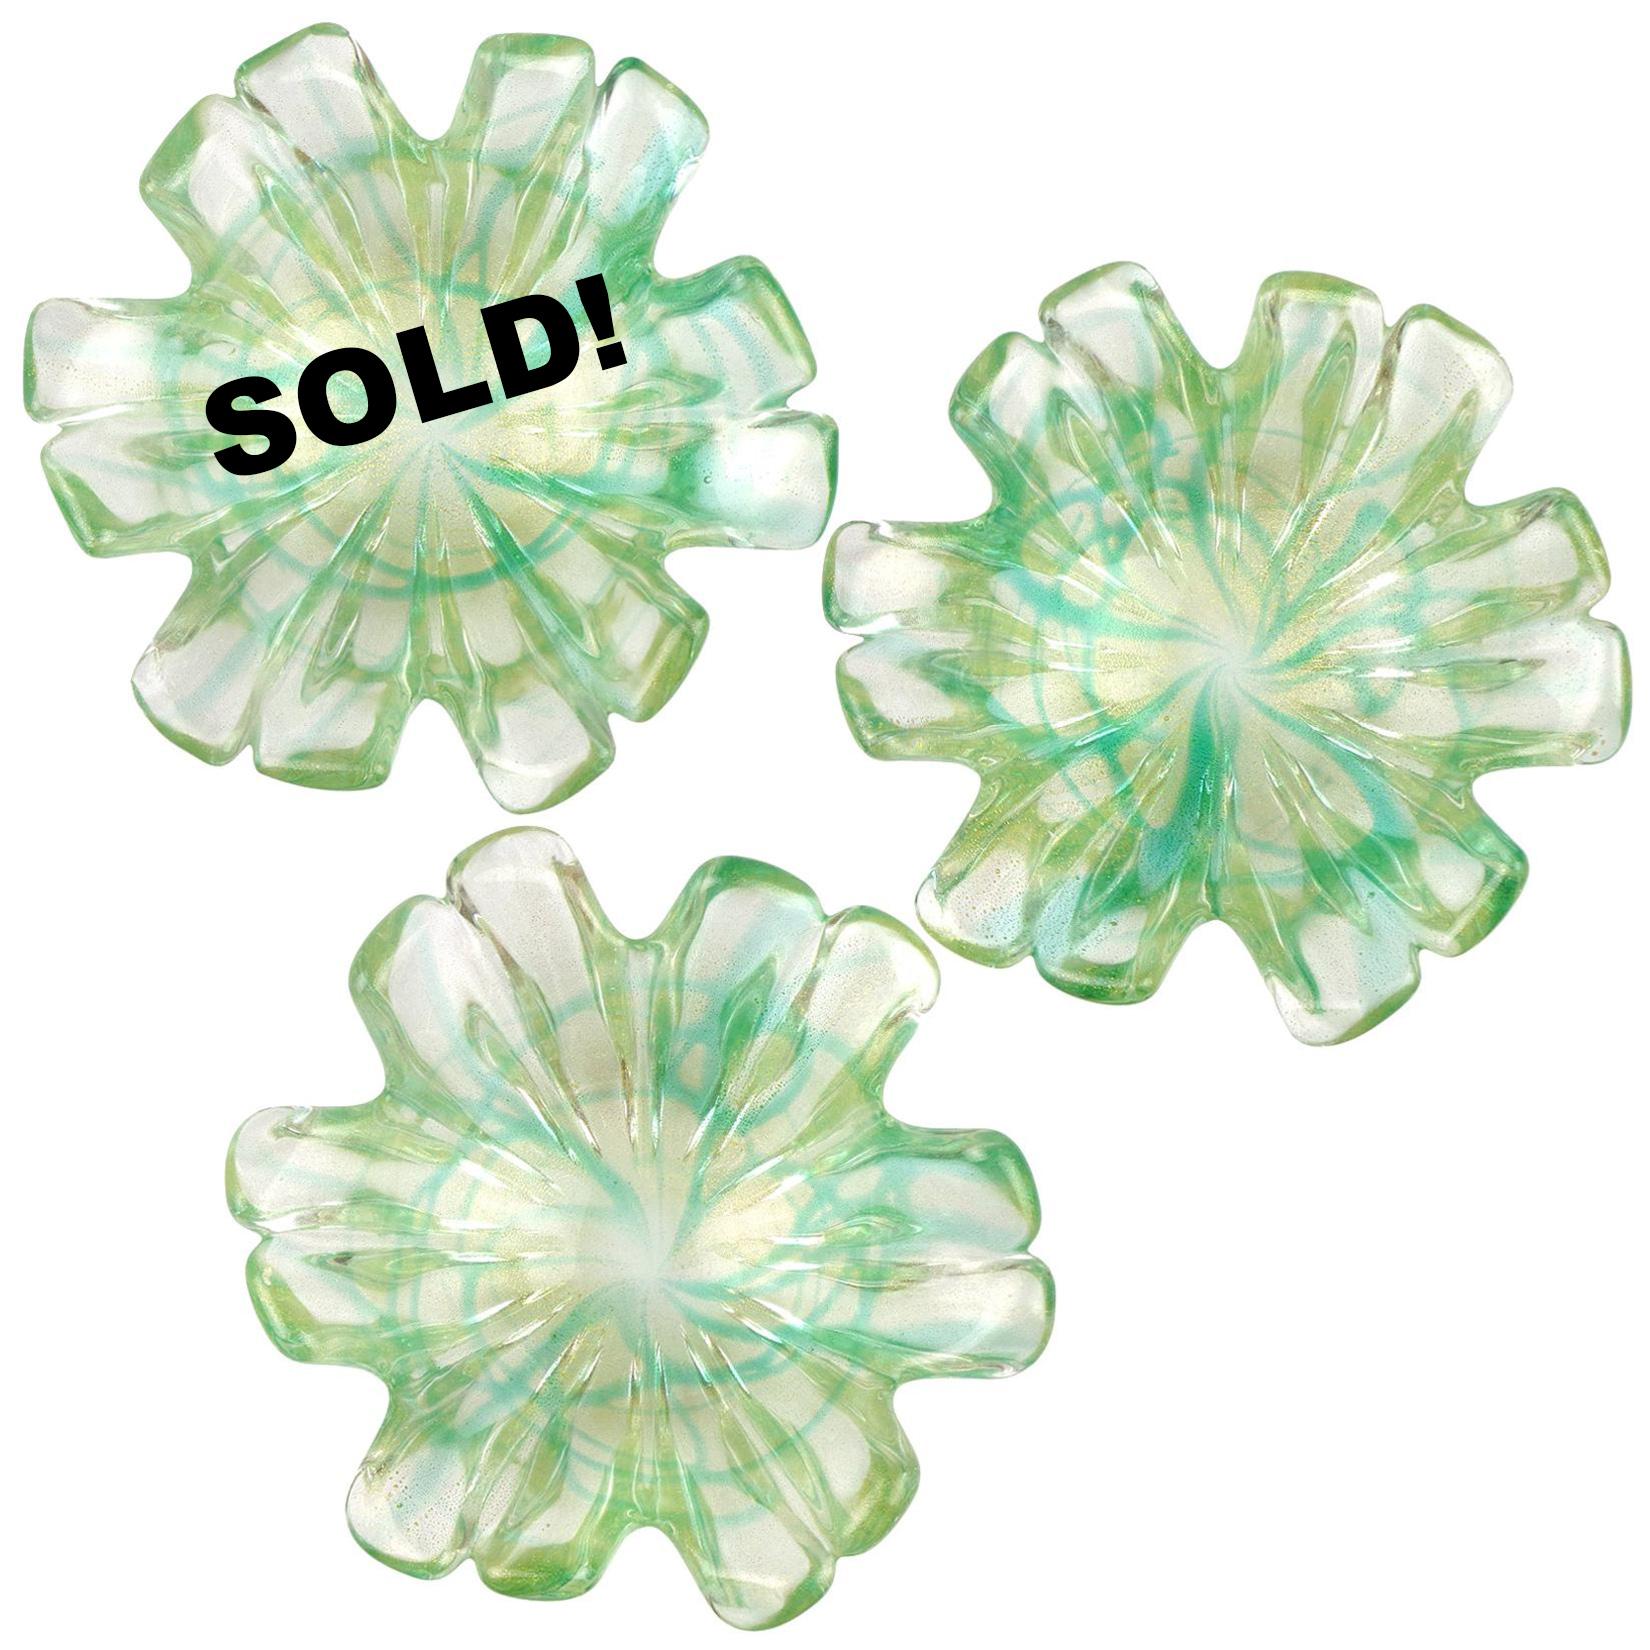 Price per item (Only 2 left). Beautiful vintage Murano hand blown green spatter swirl and gold flecks Italian art glass flower shaped bowls. The bowls are profusely covered in gold leaf. Each has its unique swirl design. Would make a great display